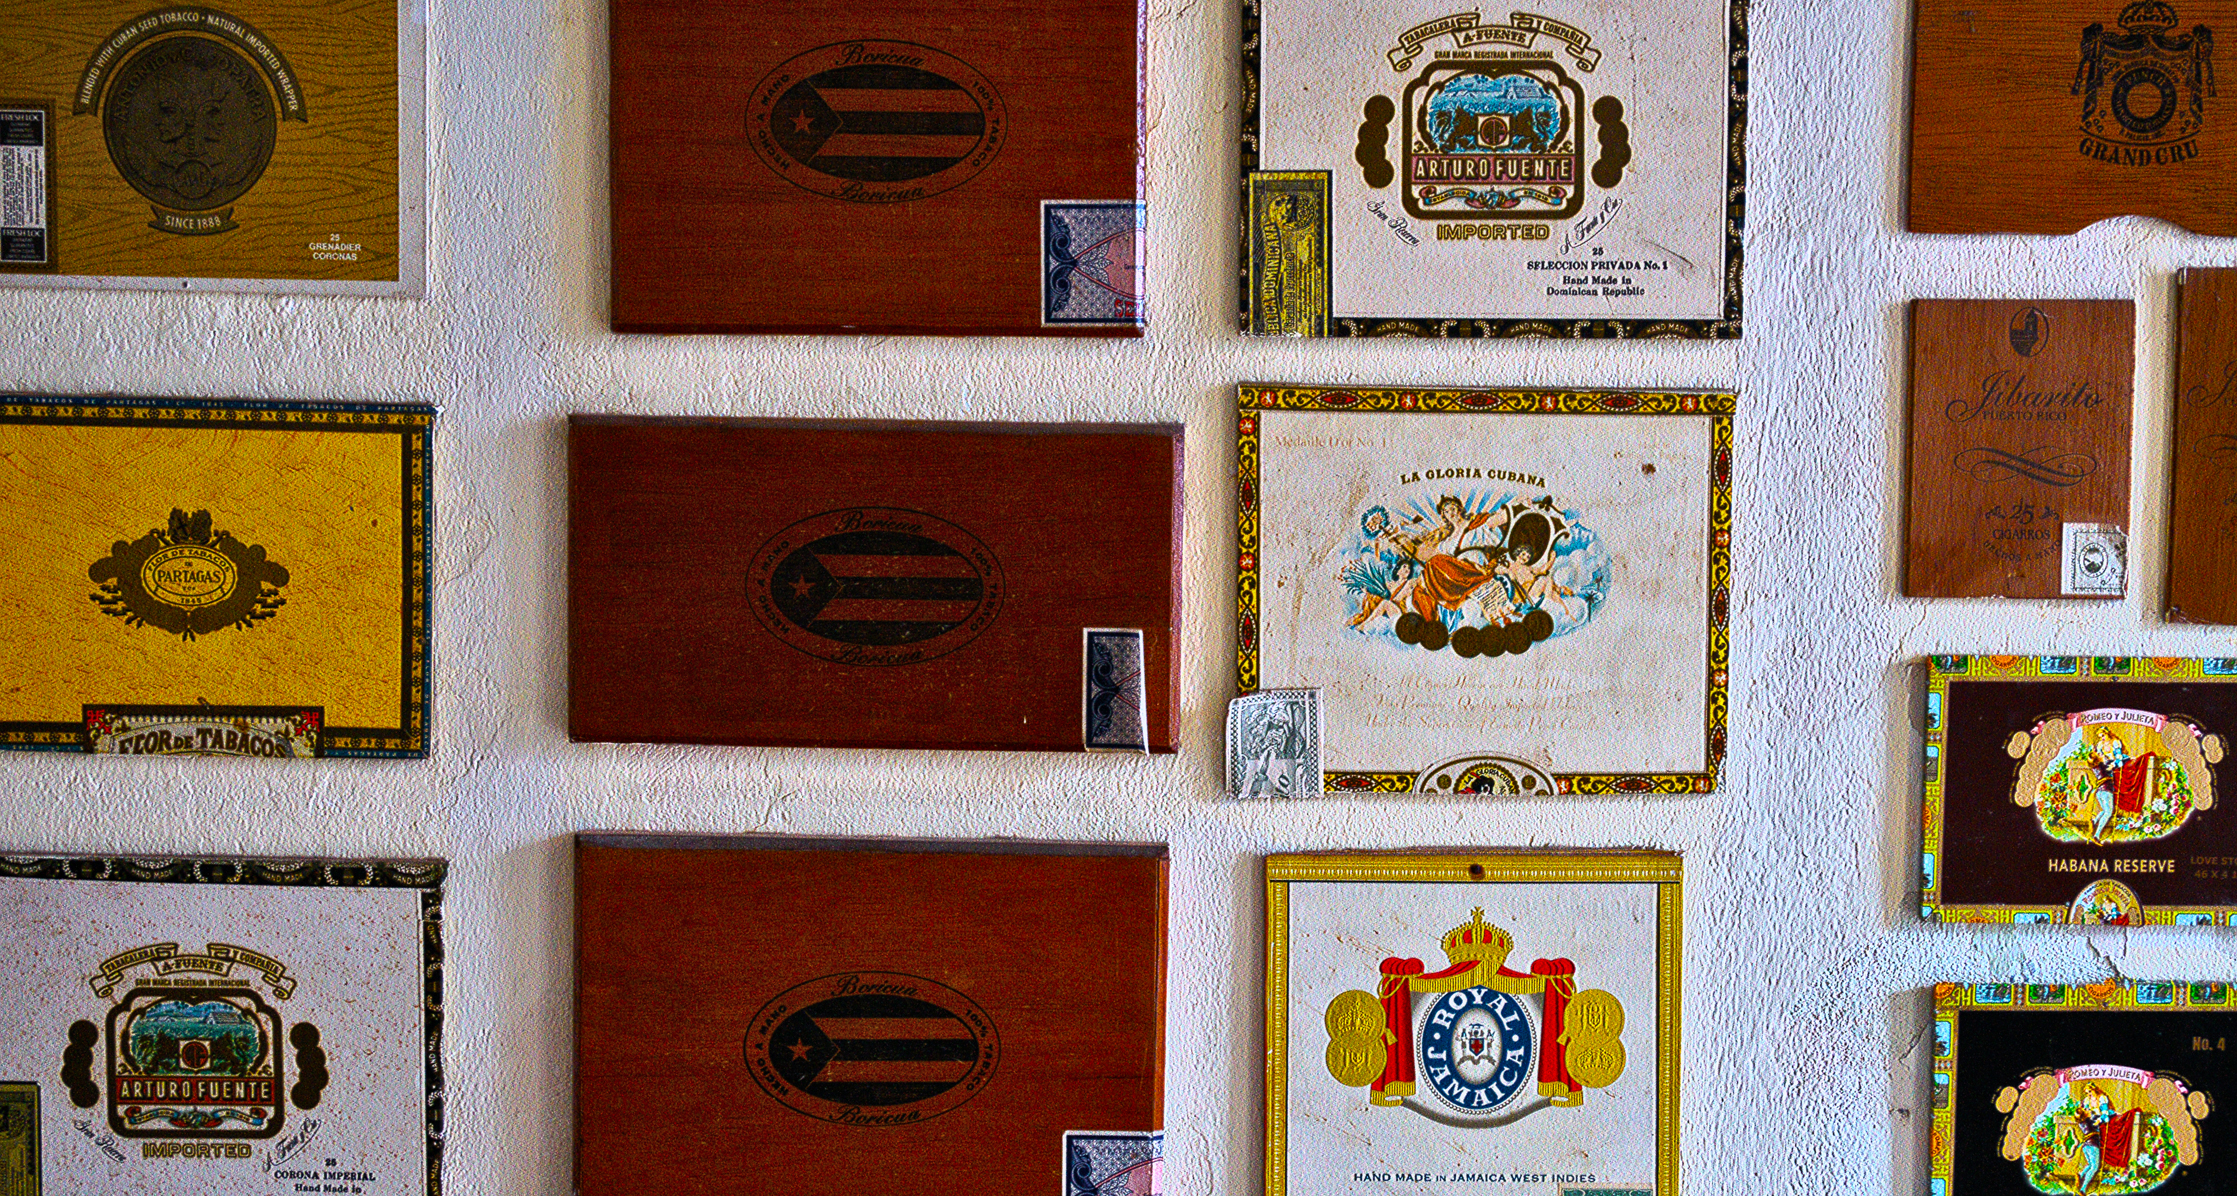 Cigar boxes on display at a tobacco store in Old San Juan.